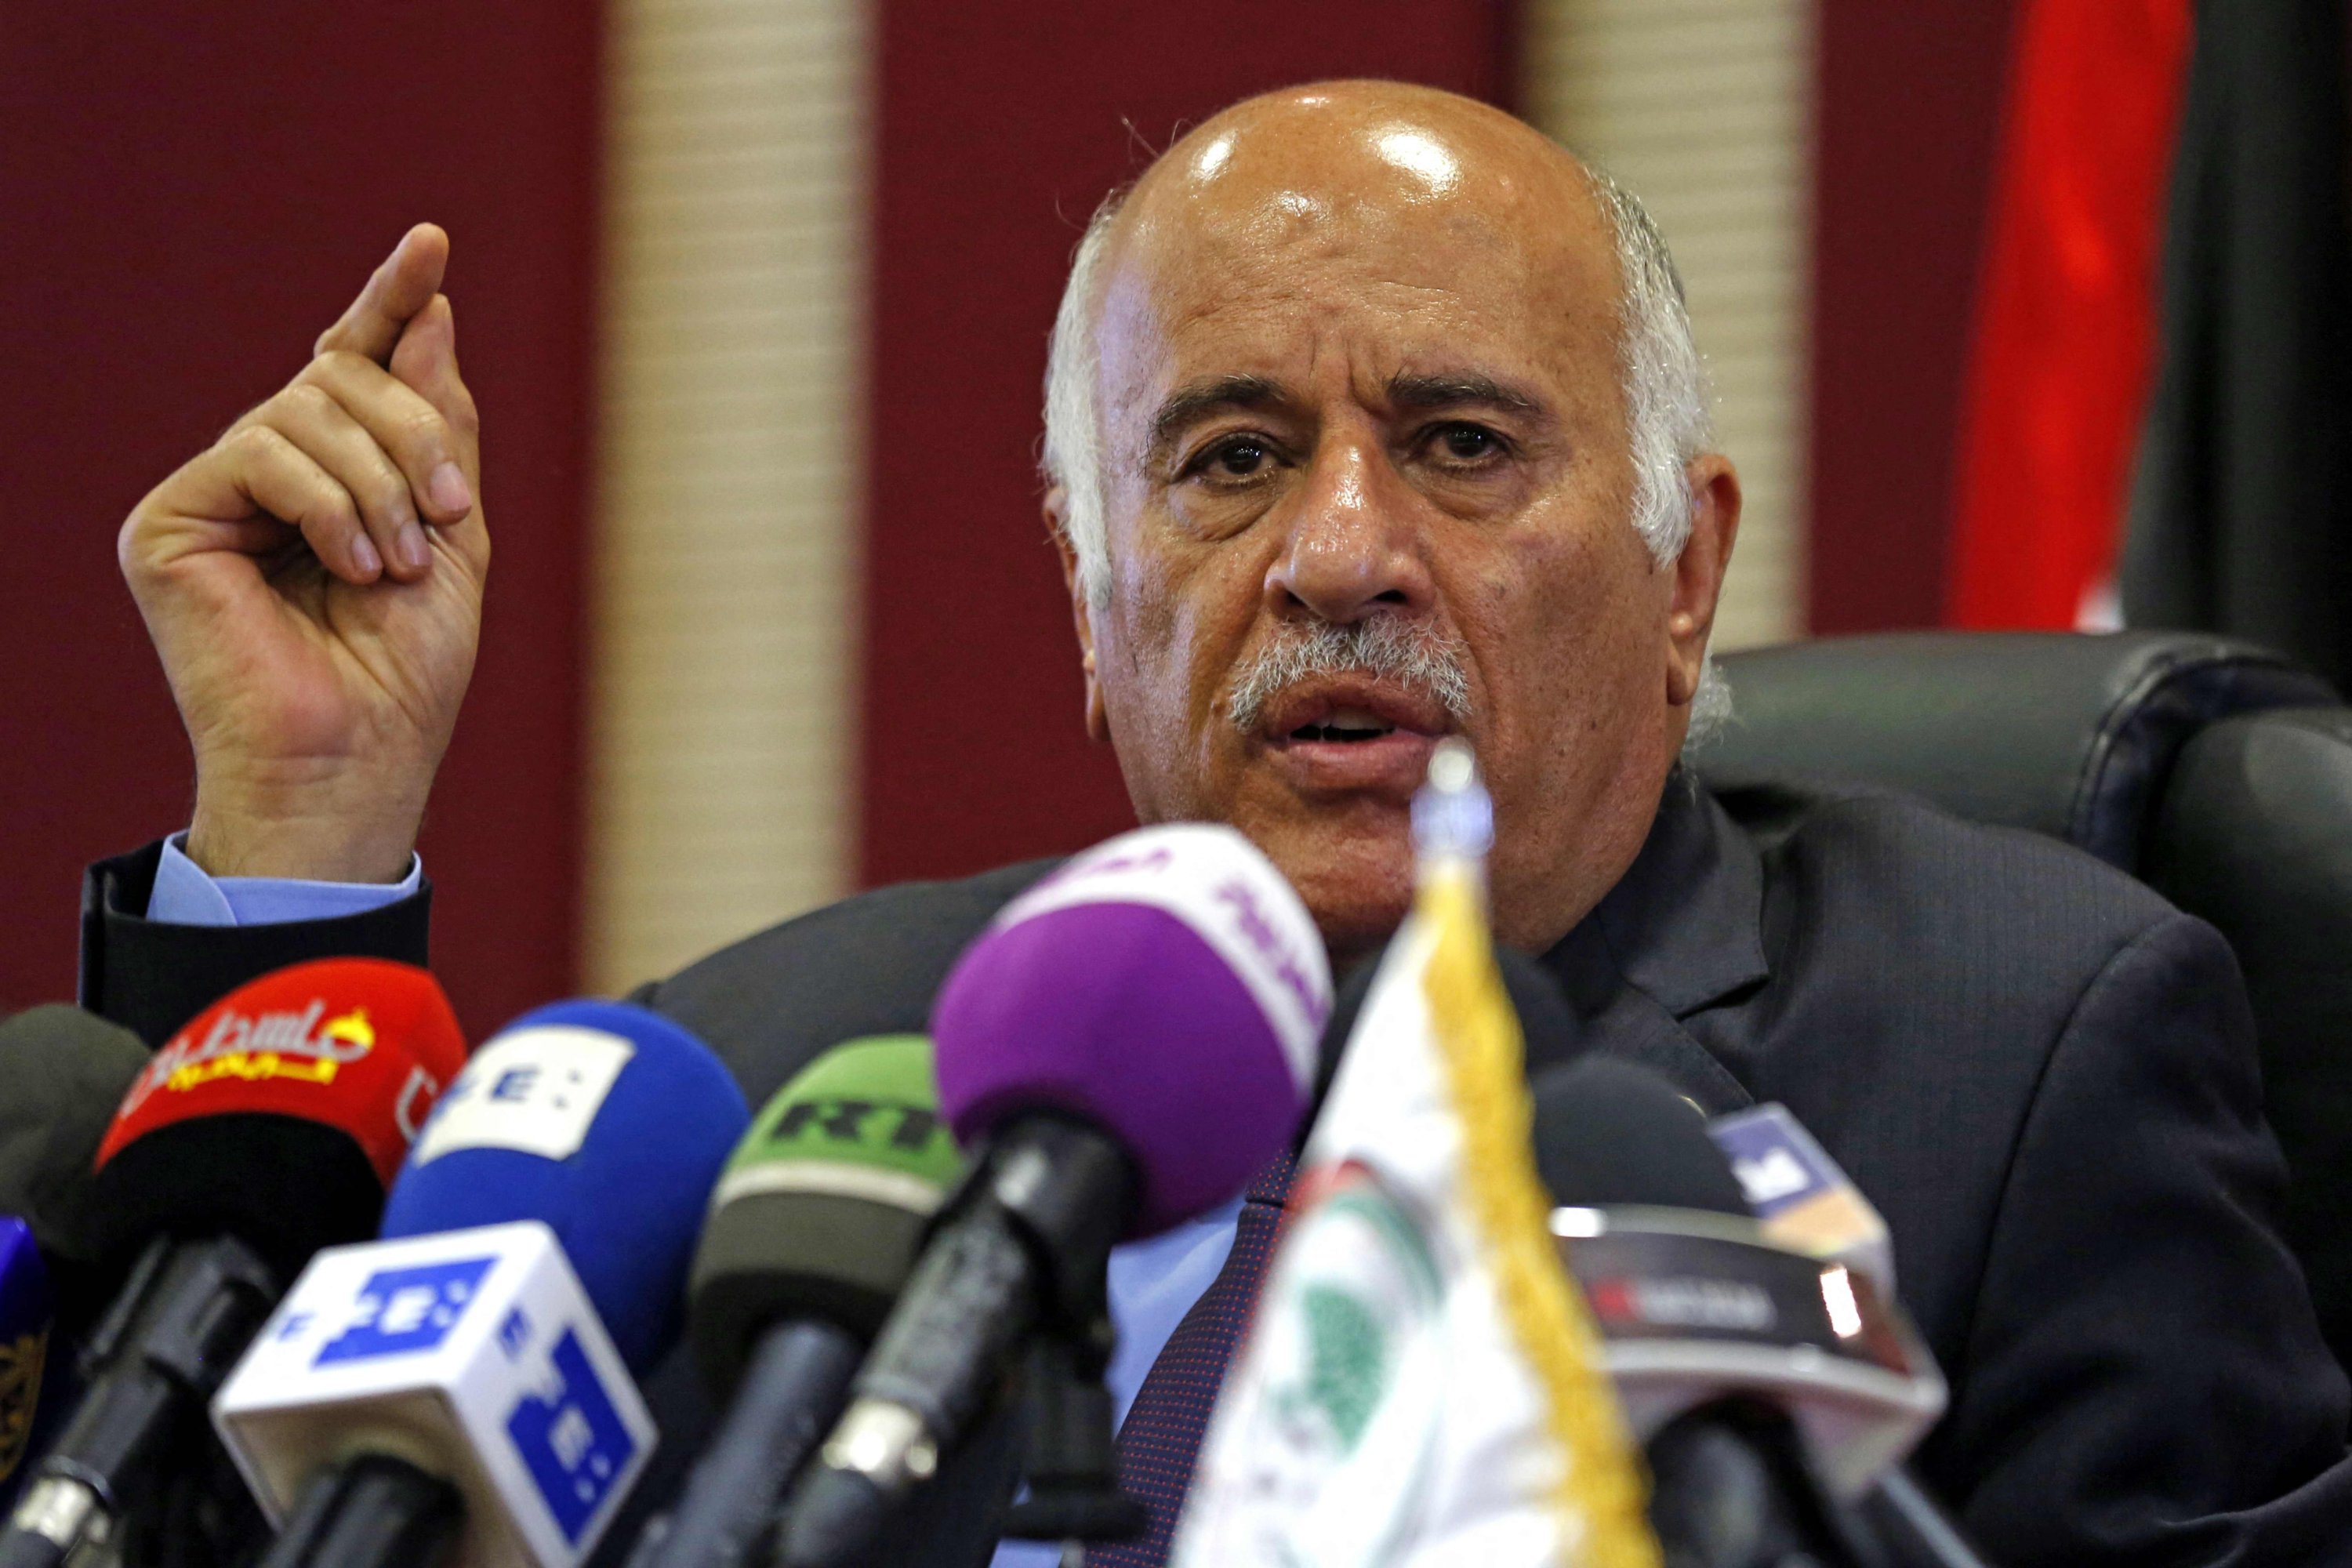 Palestinian Football Association head Jibril Rajoub speaks during a press conference in Ramallah, Palestine, June 6, 2018. (AFP Photo)